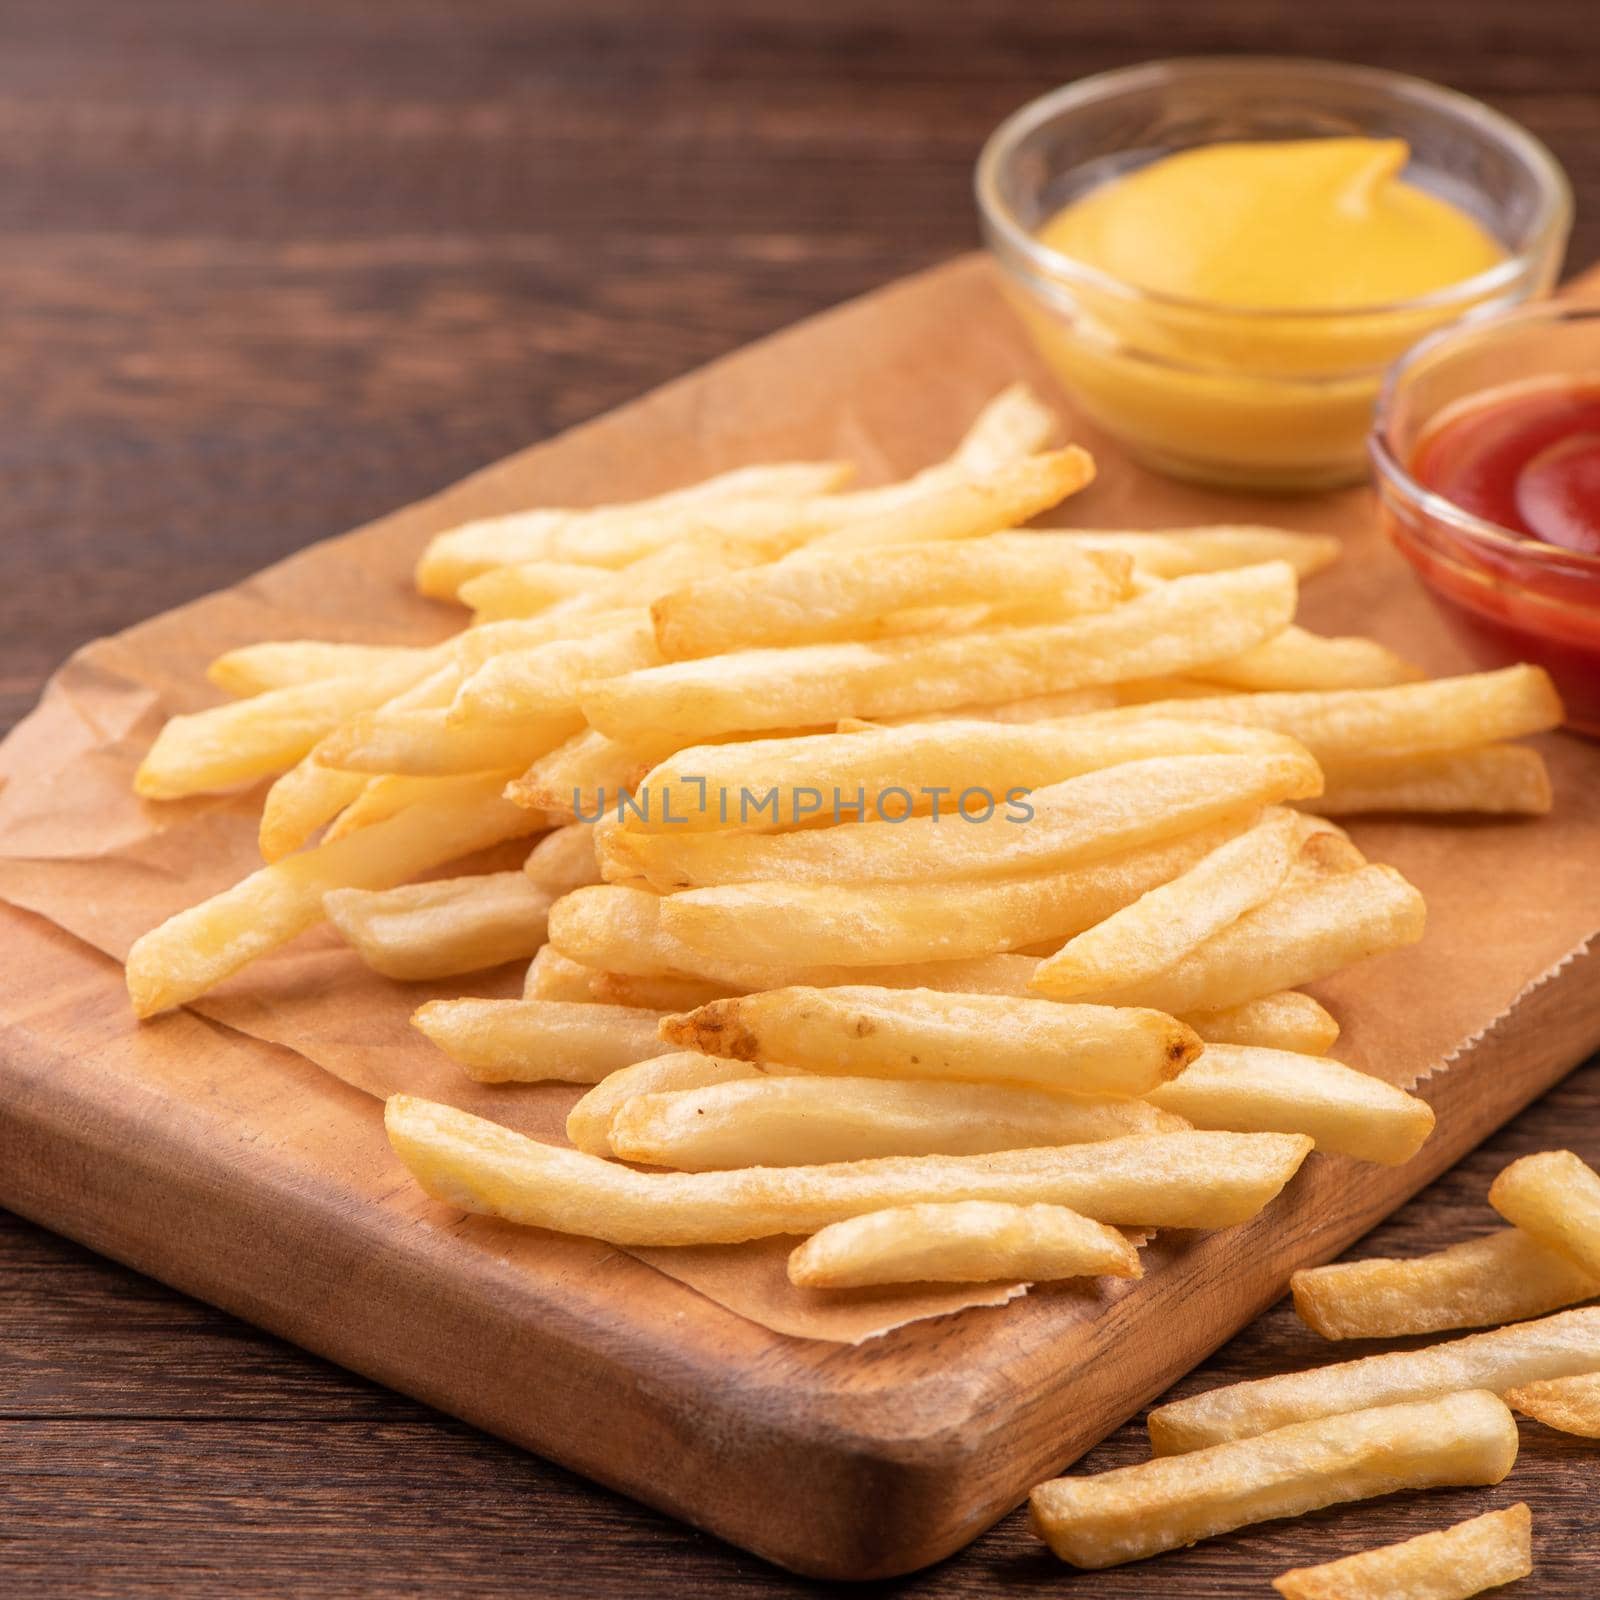 Golden yummy deep French fries on kraft baking sheet paper and serving tray to eat with ketchup and yellow mustard, top view, lifestyle. by ROMIXIMAGE